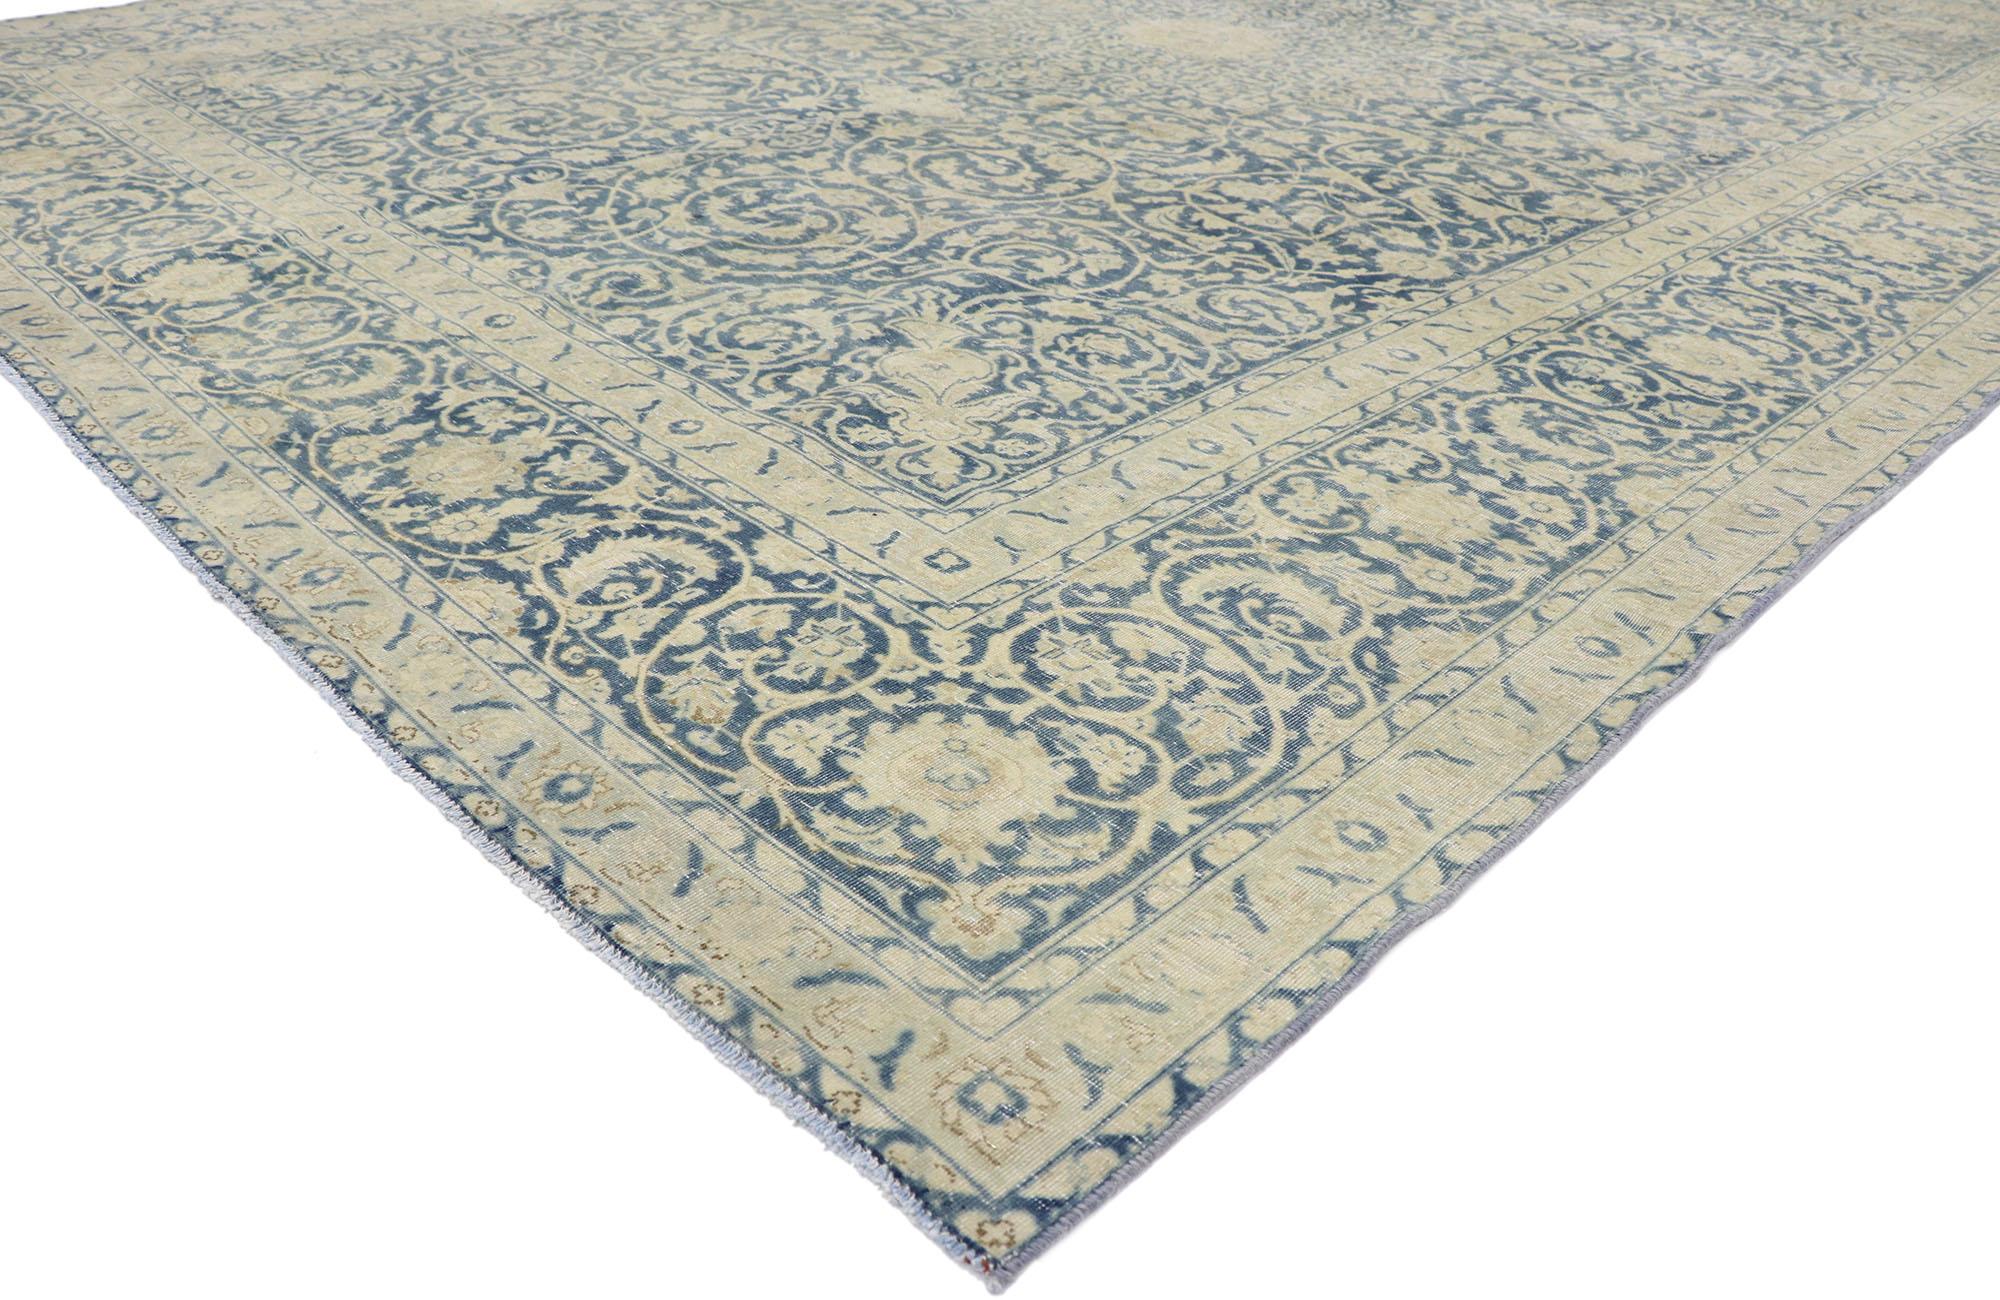 60869 distressed antique Persian Tabriz rug with rustic Greek Mediterranean style. Emanating coastal vibes with light and airy colors, this hand-knotted wool distressed antique Persian Tabriz rug is a captivating vision of woven beauty. Taking